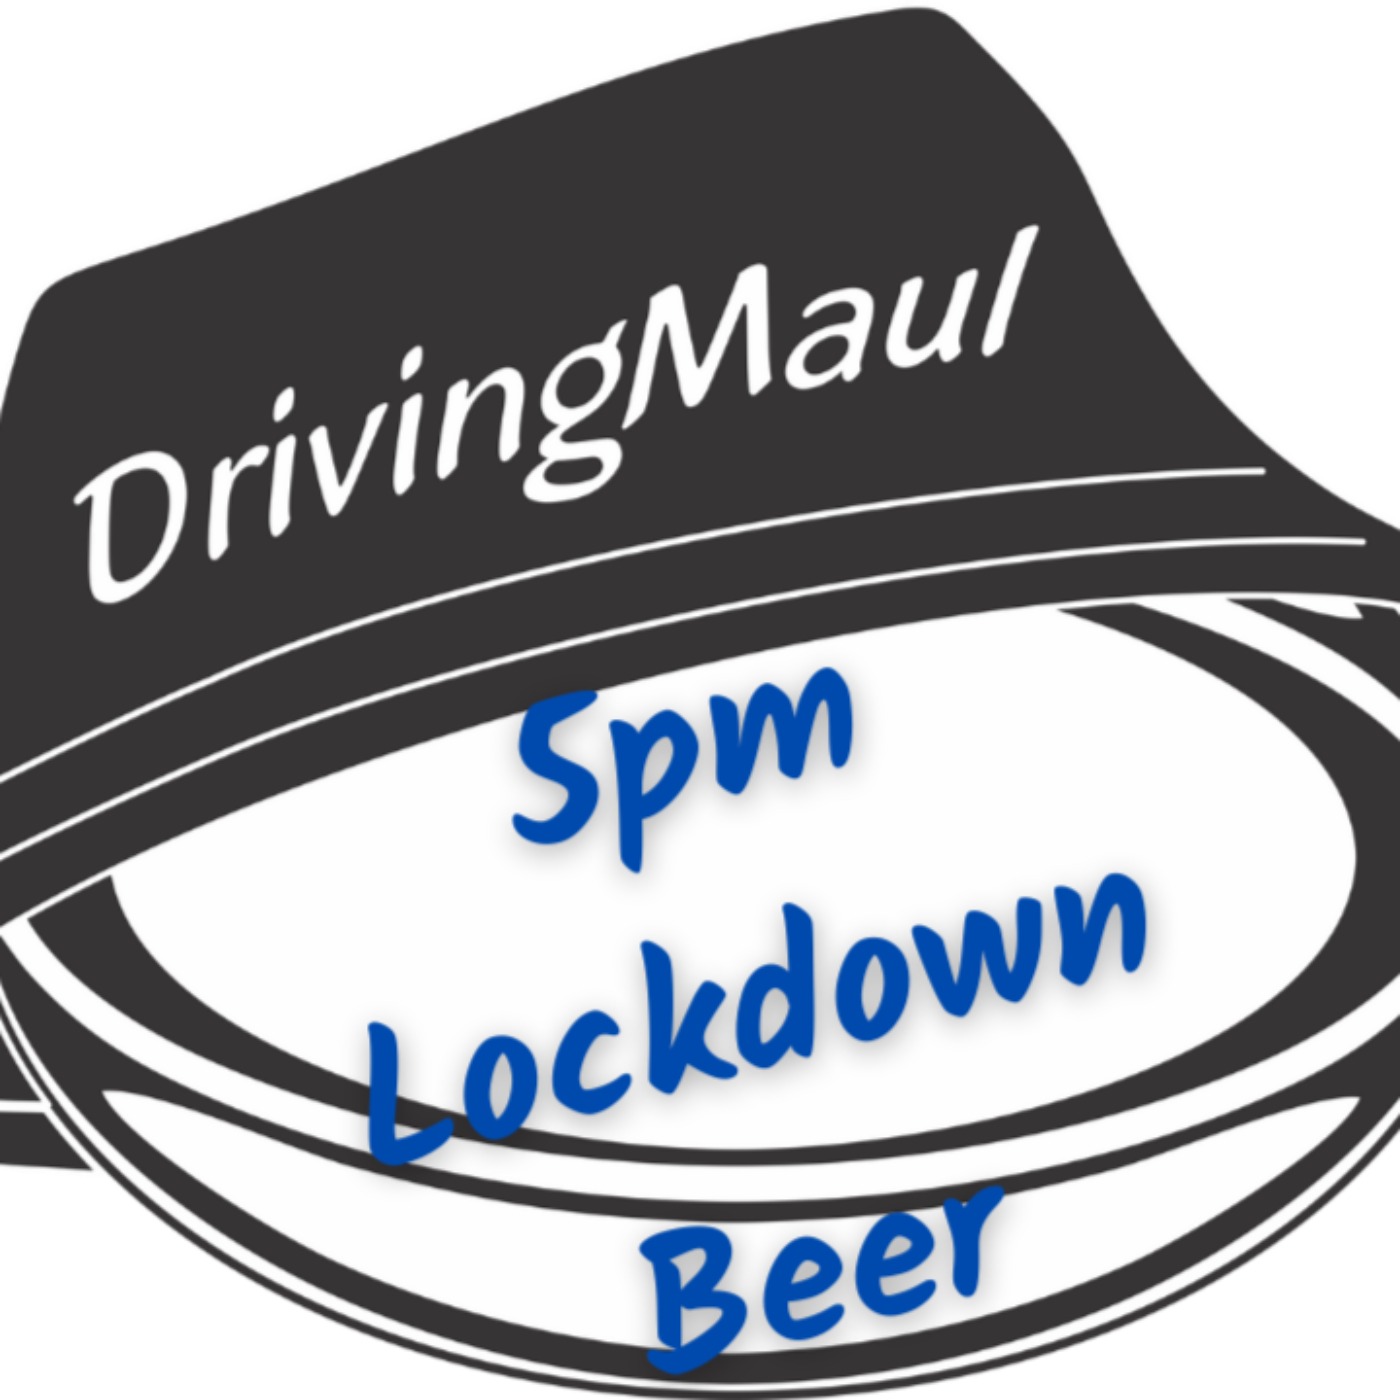 5pm Lockdown Beers & Rugby Chat - All About The Pacific